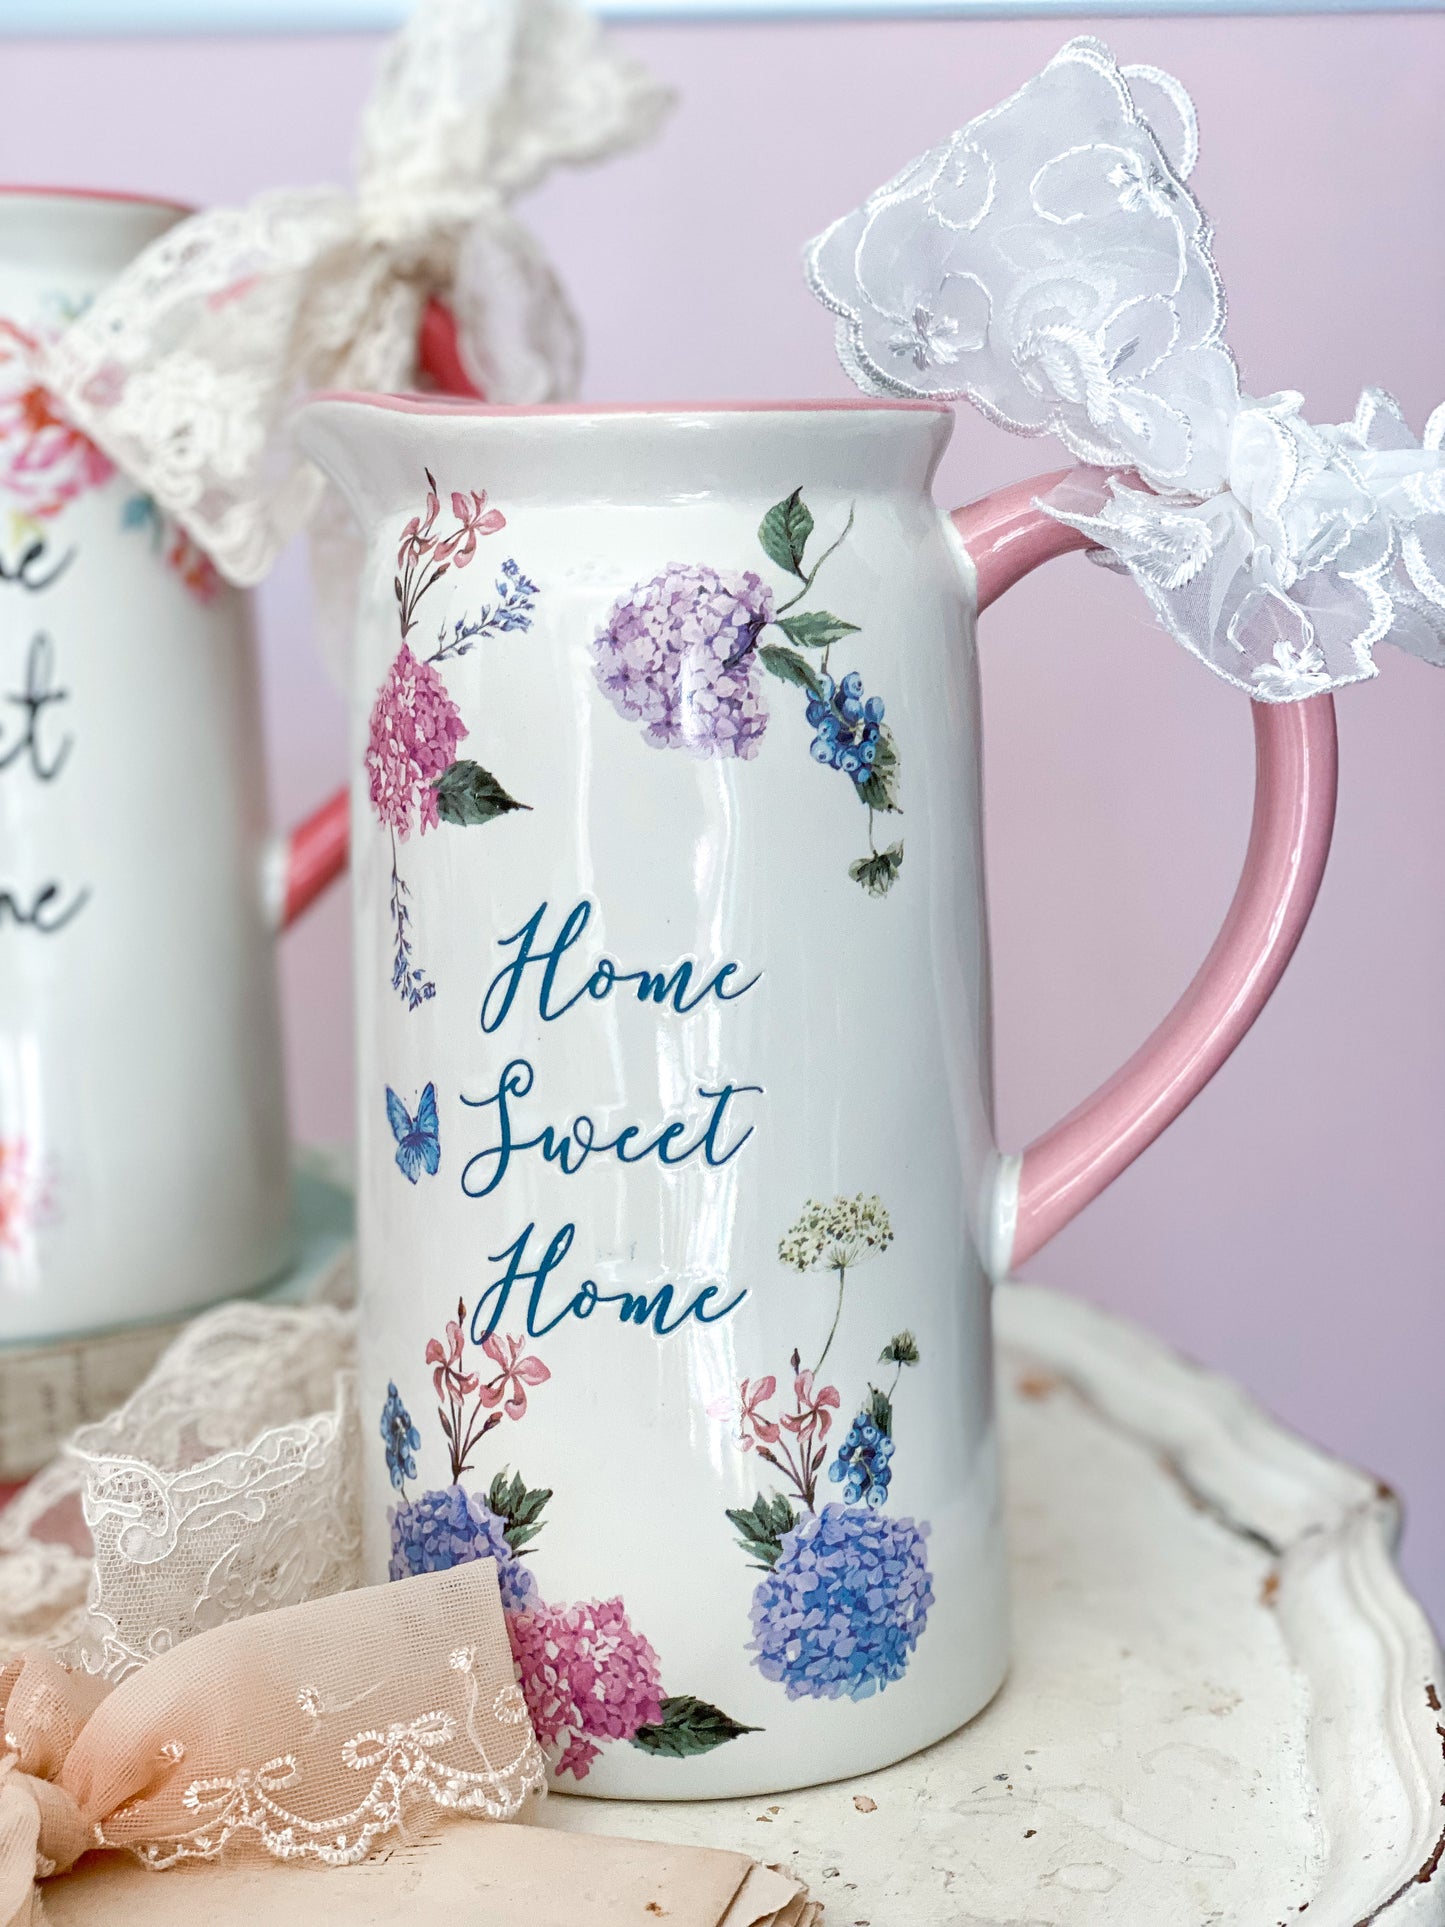 Home Sweet Home Pastel pink, blue and purple Floral Pitchers with peonies and hydrangeas